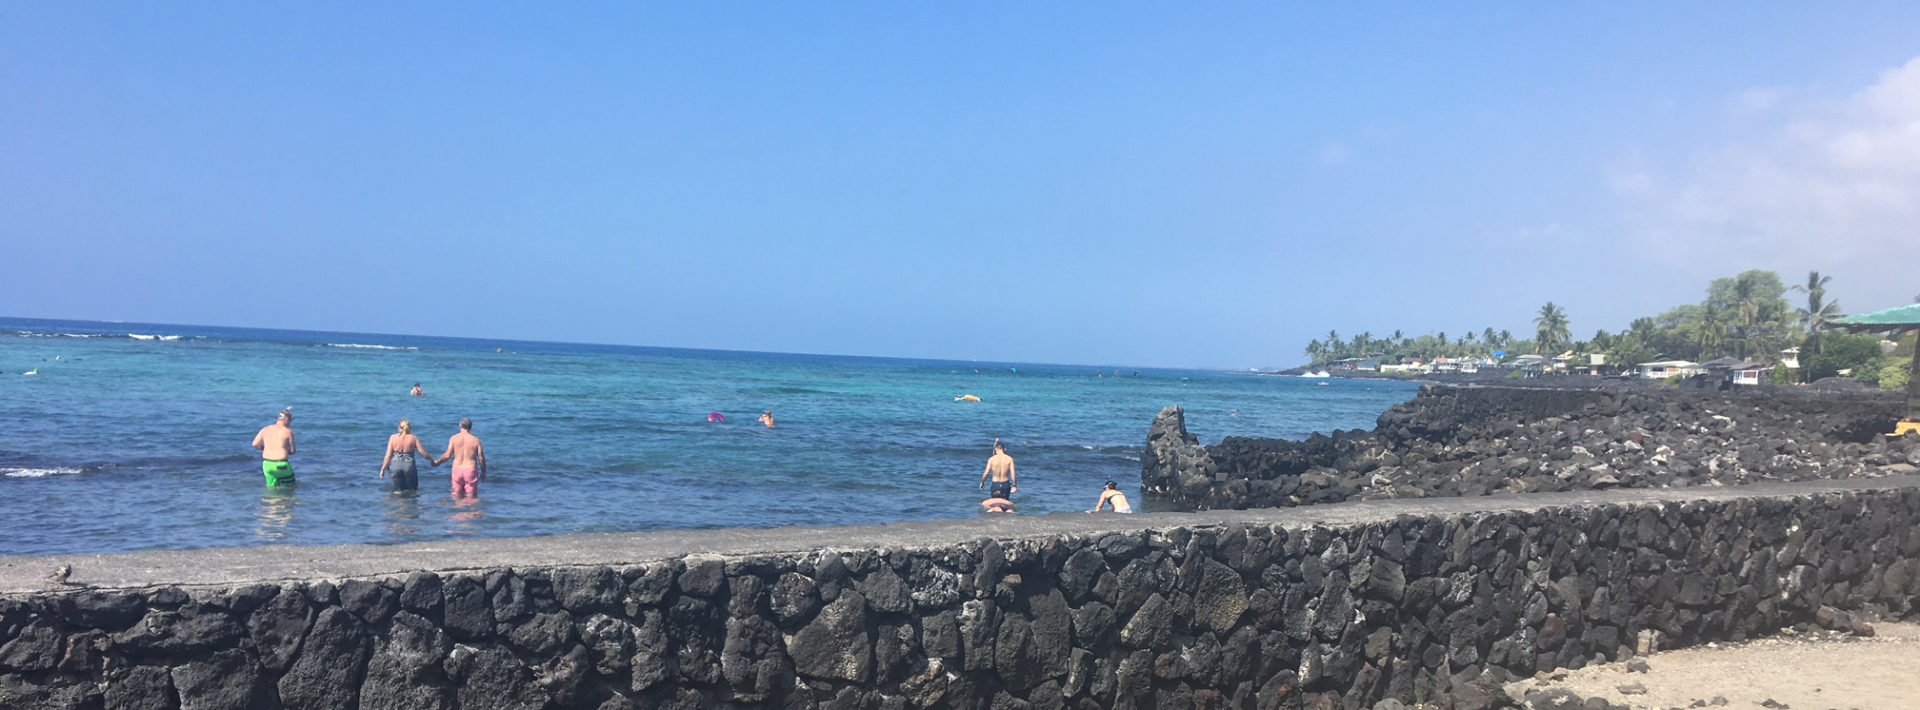 TREX 2018 Day 10: Snorkeling and a ONE-MA3 Connection